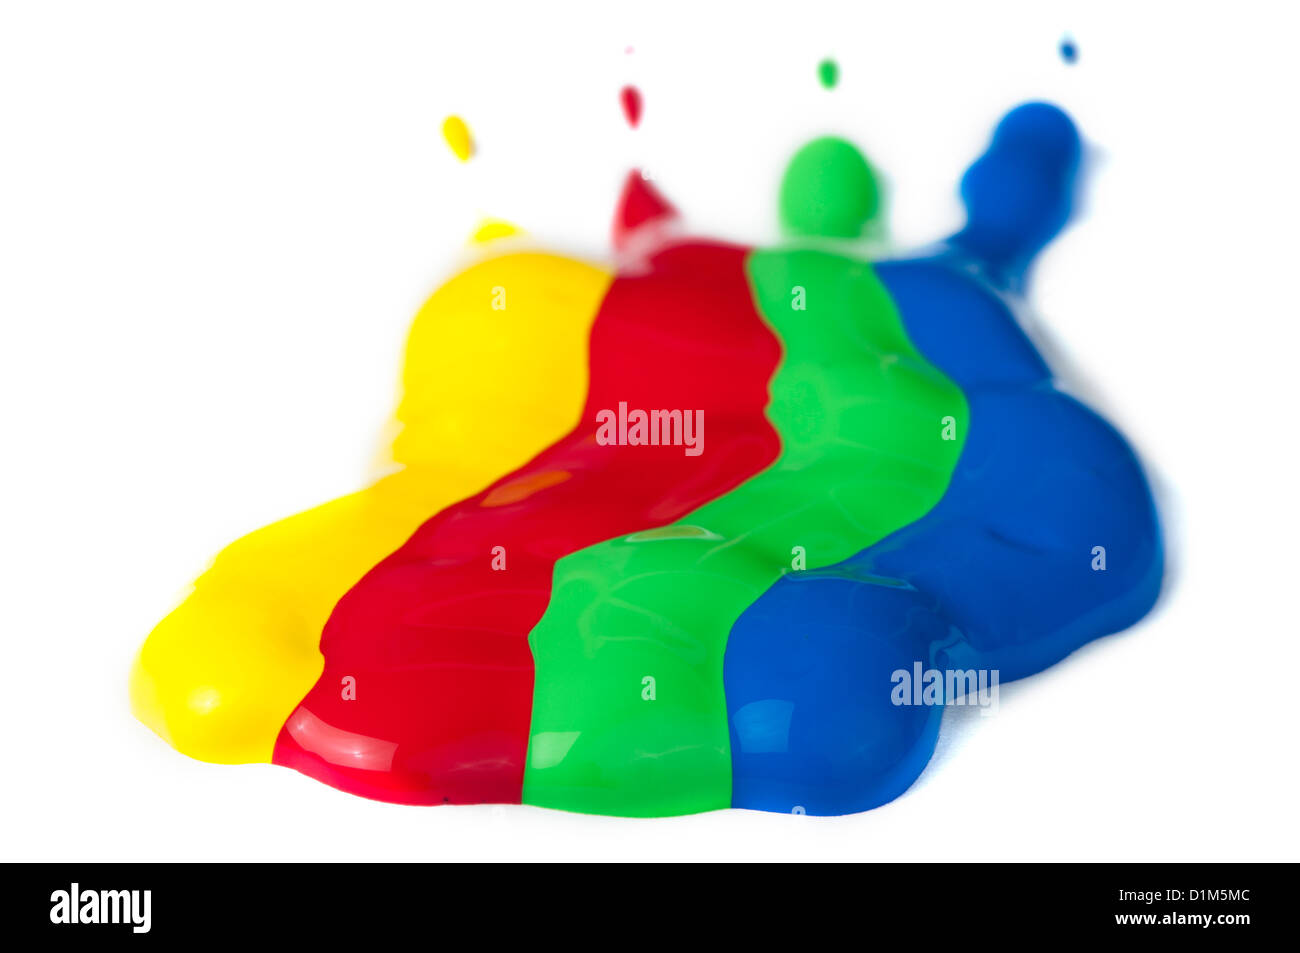 Paint coated on paper. Even paint squeezed from tube. Red, green, blue and yellow colors. Stock Photo